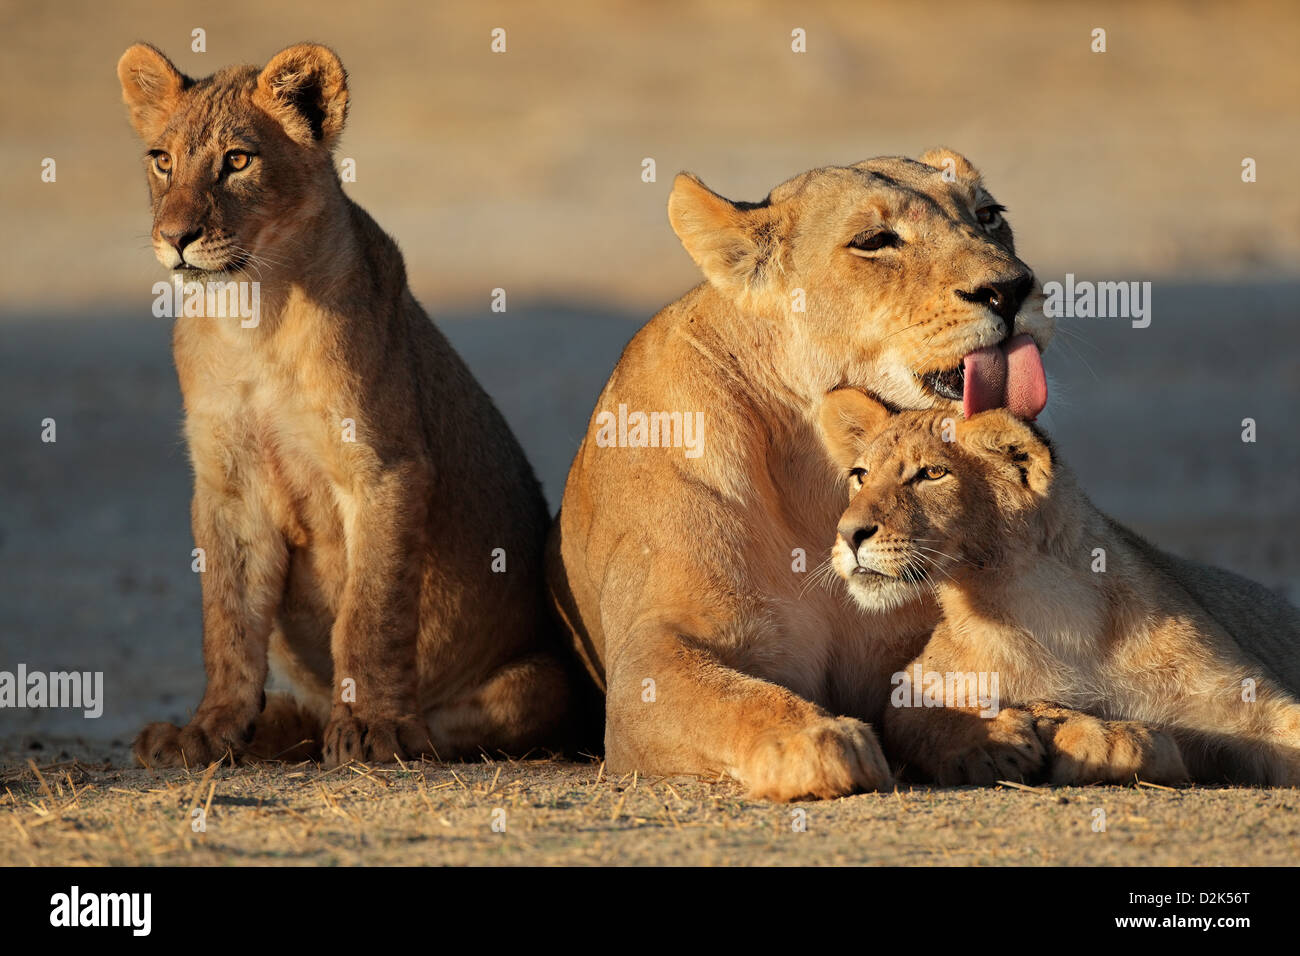 Lioness with cubs (Panthera leo) in early morning light, Kalahari desert, South Africa Stock Photo